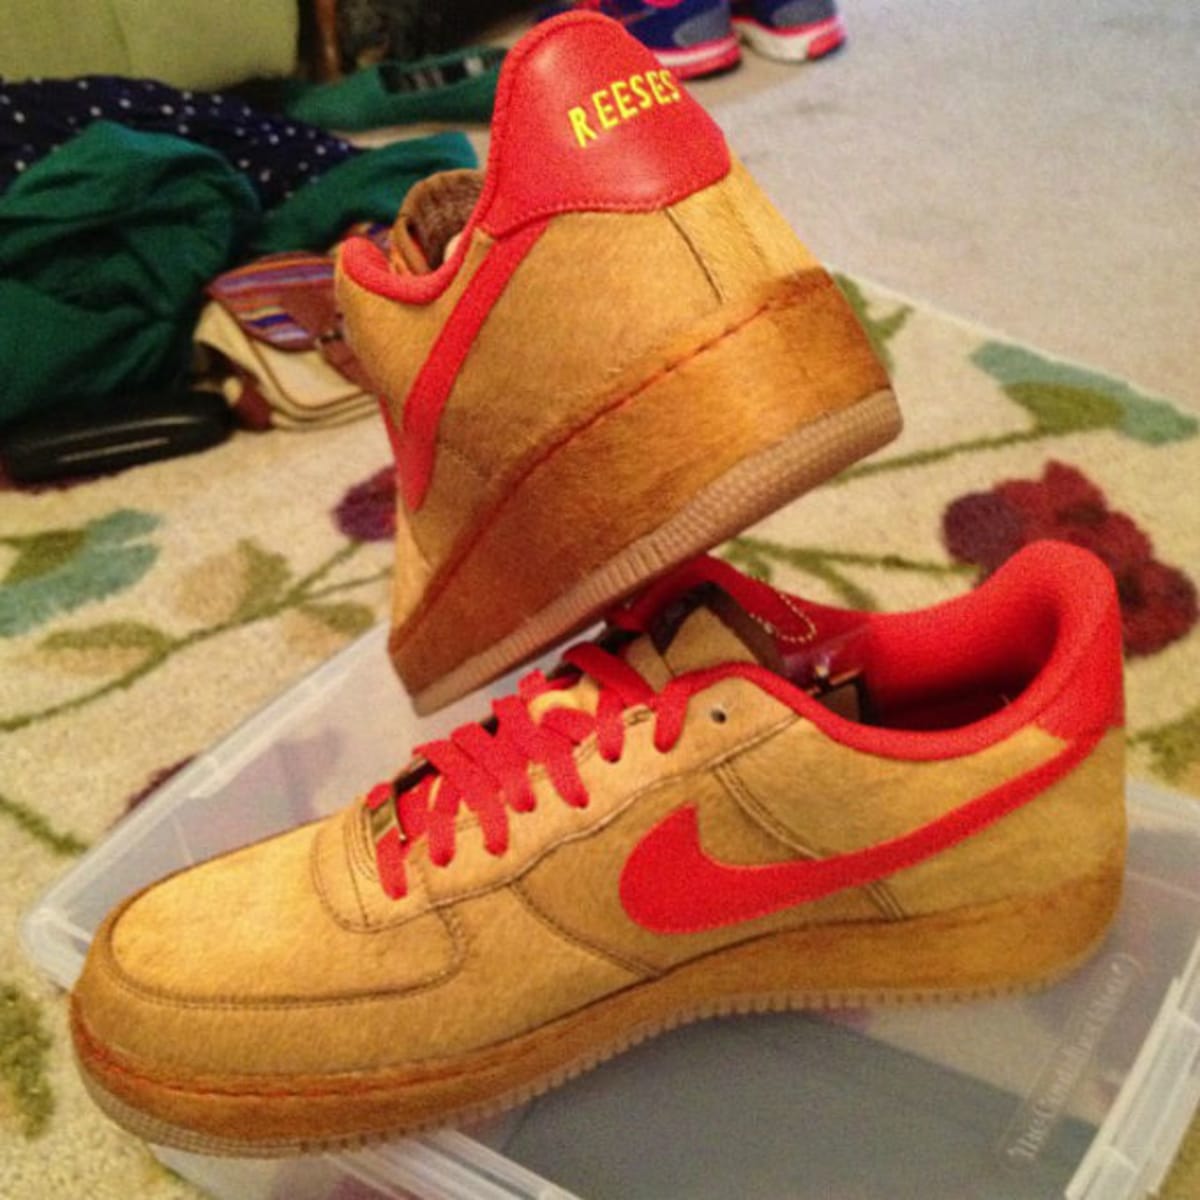 NIKEiD Air Force 1 Low E.T. - The 20 Best Movie-Inspired ...